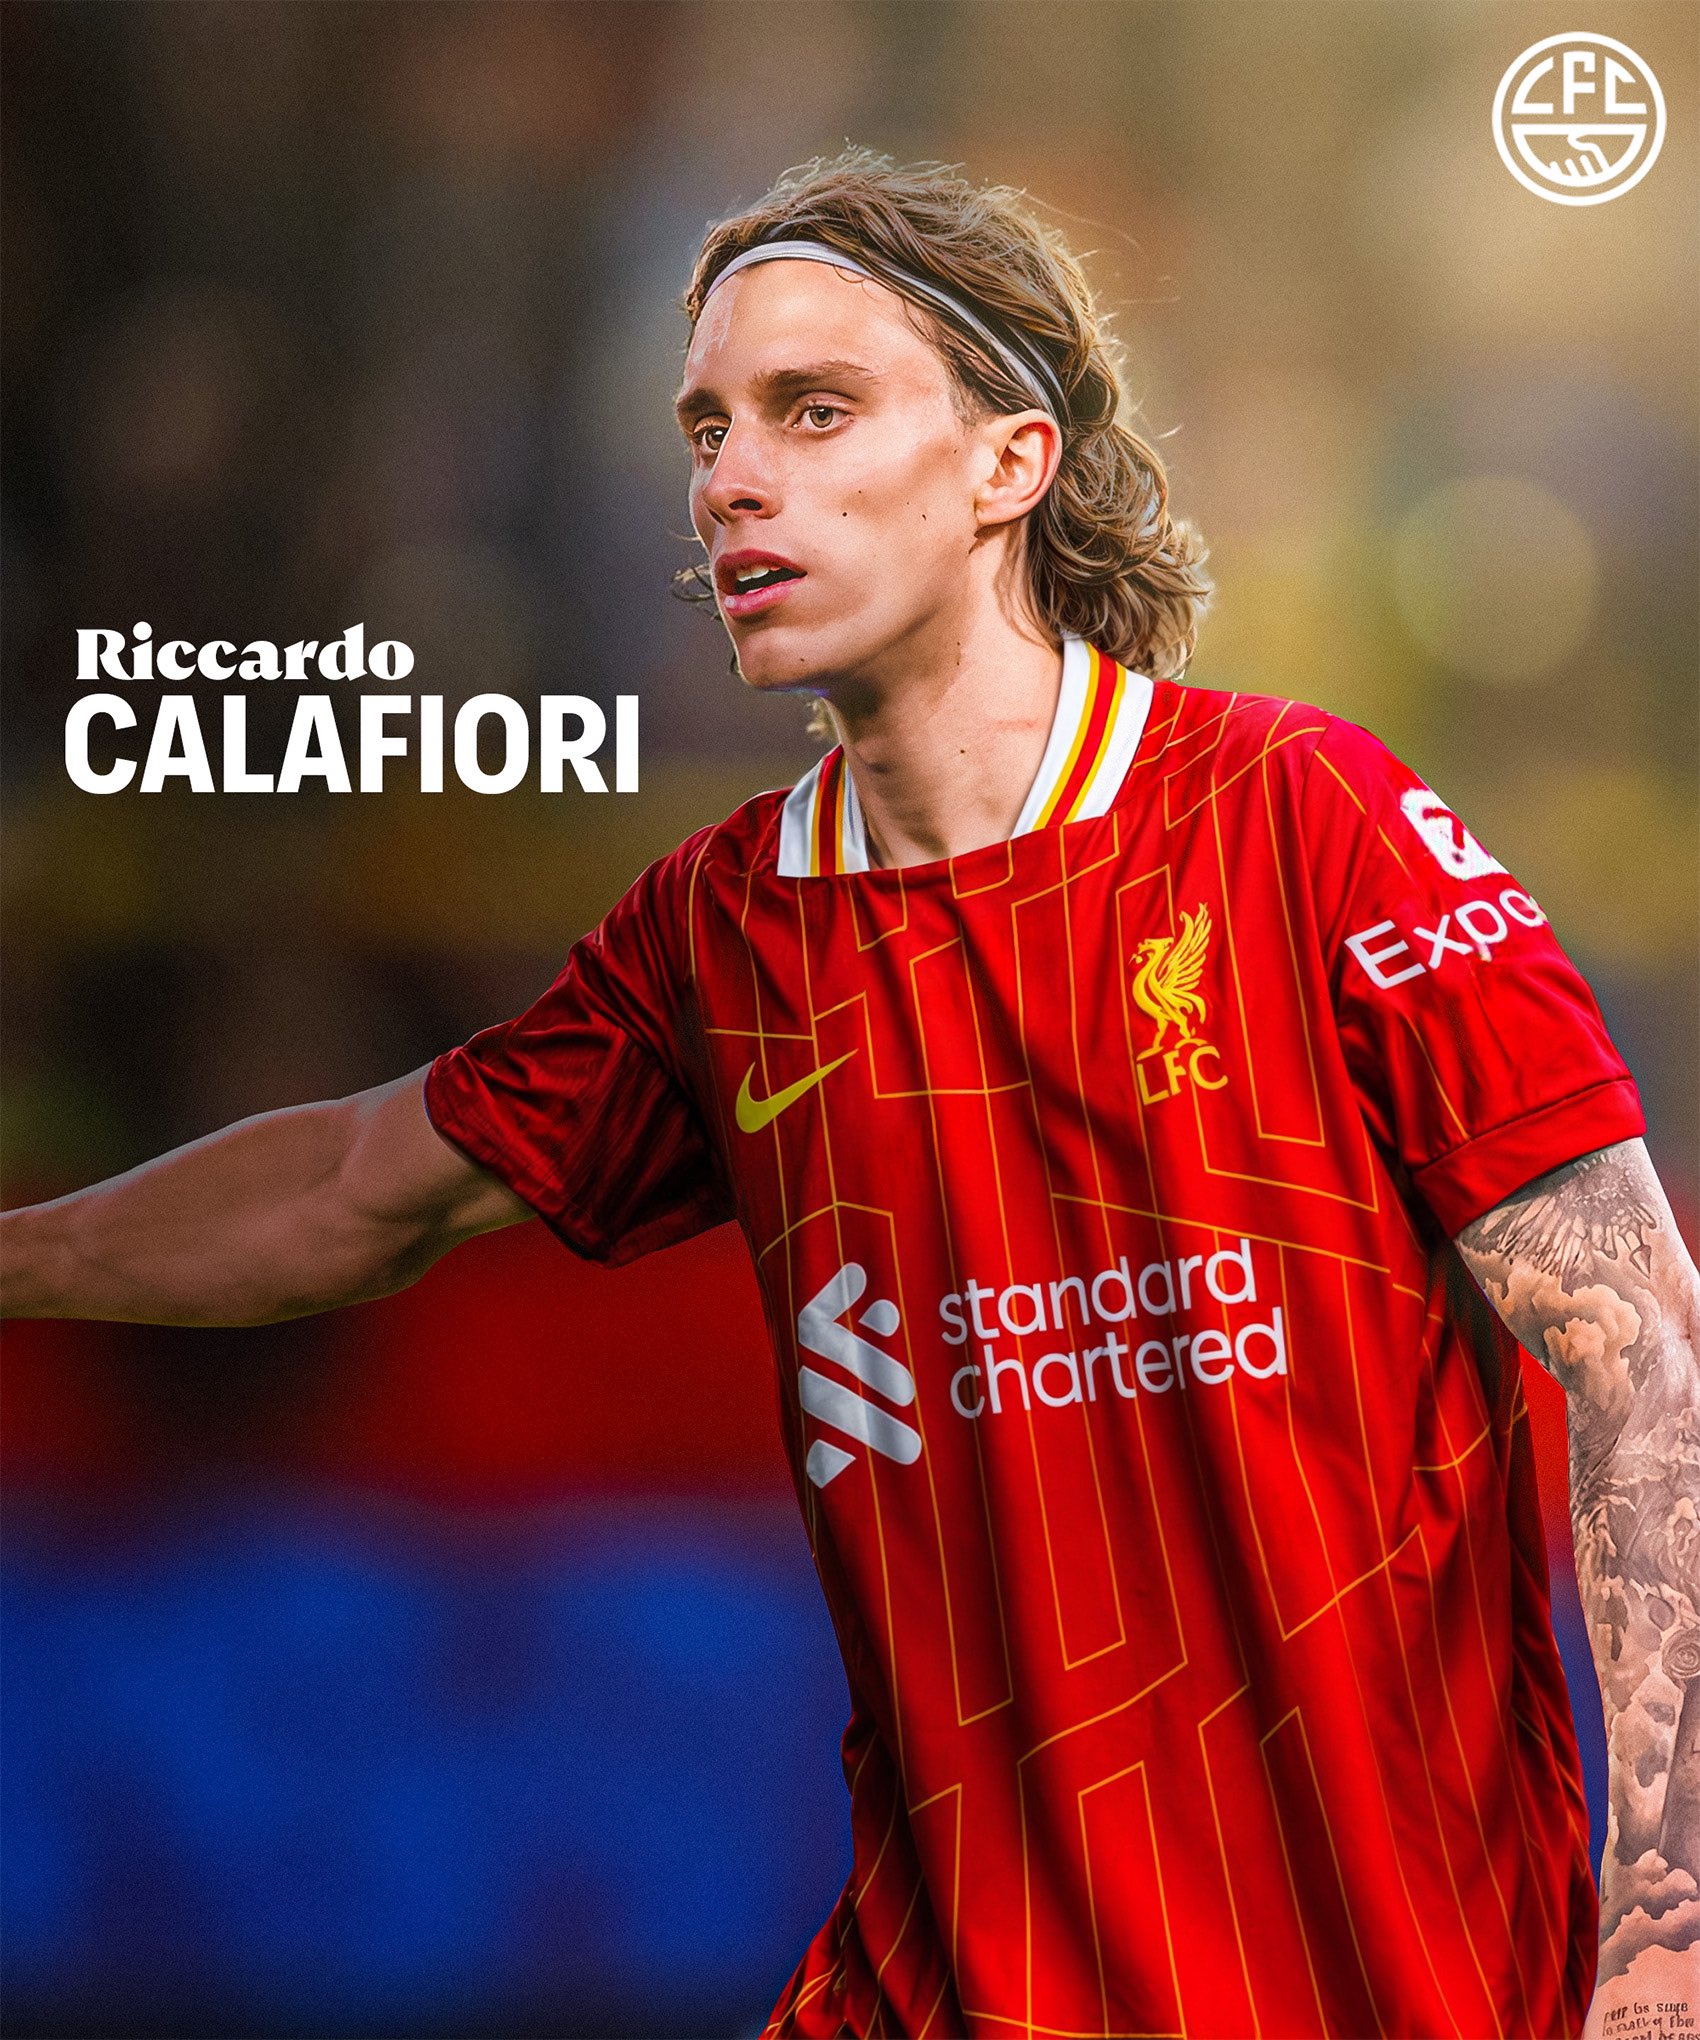 LFC Transfer Room on X: "𝗡𝗘𝗪 𝗧𝗔𝗥𝗚𝗘𝗧 𝗔𝗟𝗘𝗥𝗧? ️ A number of  reliable sources have now confirmed @LFC's interest in @Bolognafc1909's  Riccardo Calafiori (22)  It seems that the Italian side are